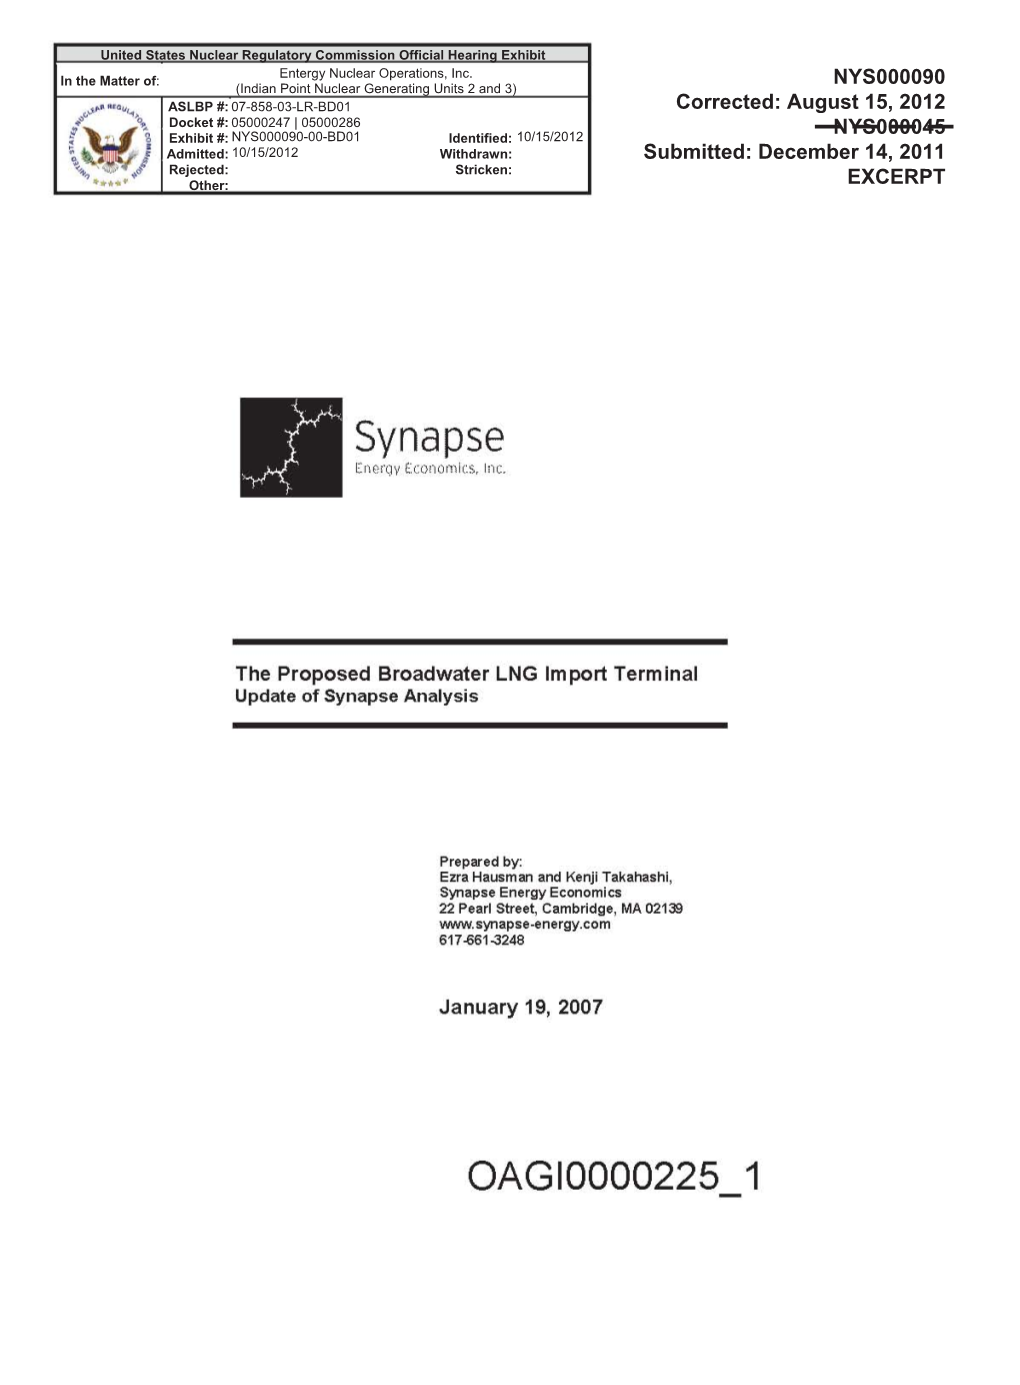 The Proposed Broadwater LNG Import Terminal Update of Synapse Analysis